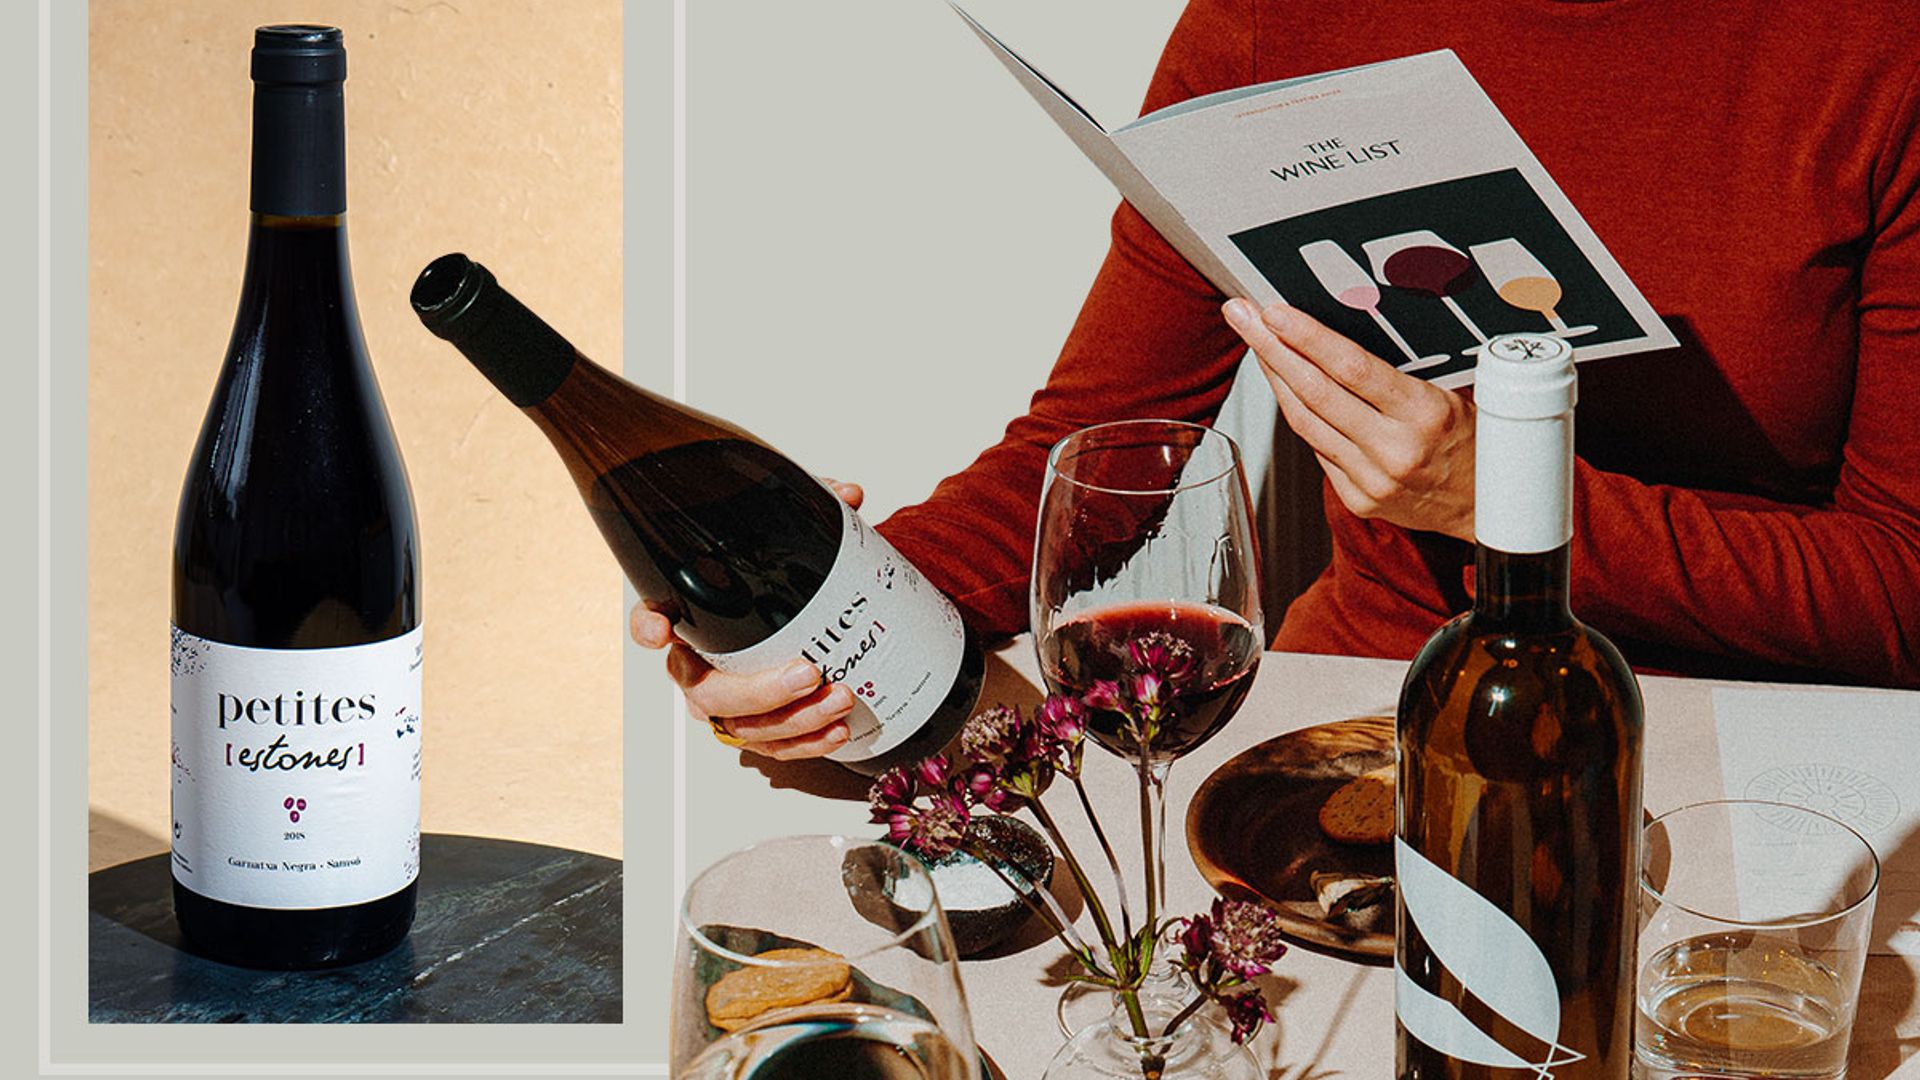 The Wine List: The monthly wine subscription service EVERYONE is talking about right now